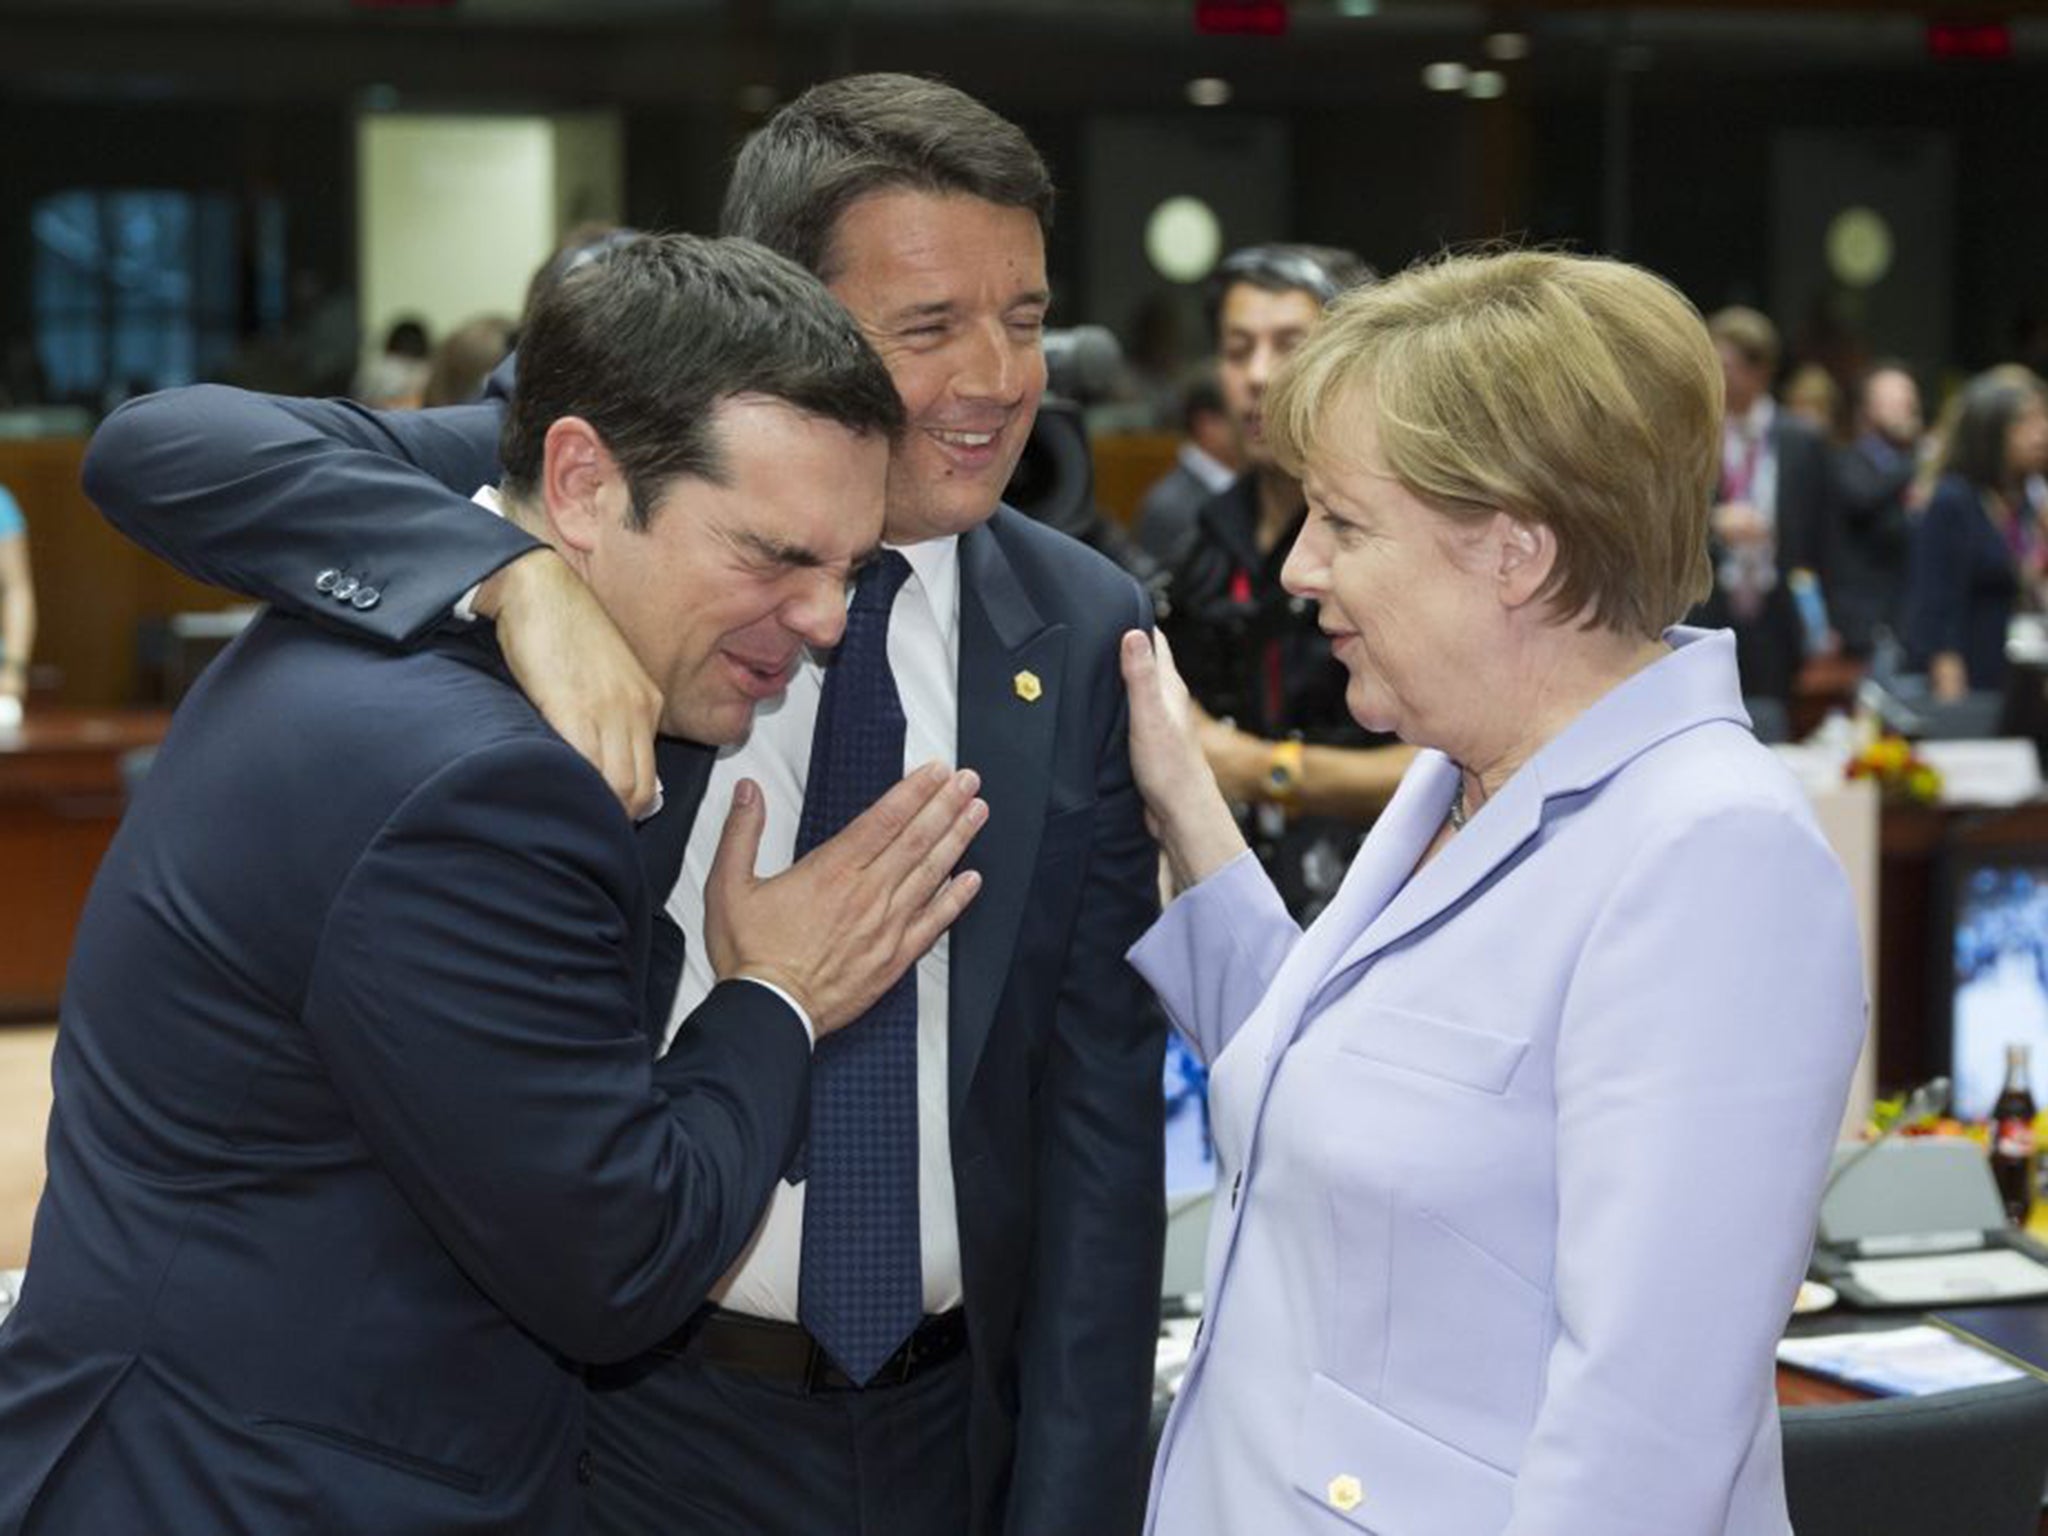 Greek Prime Minister Alexis Tsipras, Italian Prime Minister Matteo Renzi and German Chancellor Angela Merkel during one of the summit meetings in Brussels on Thursday (EPA)